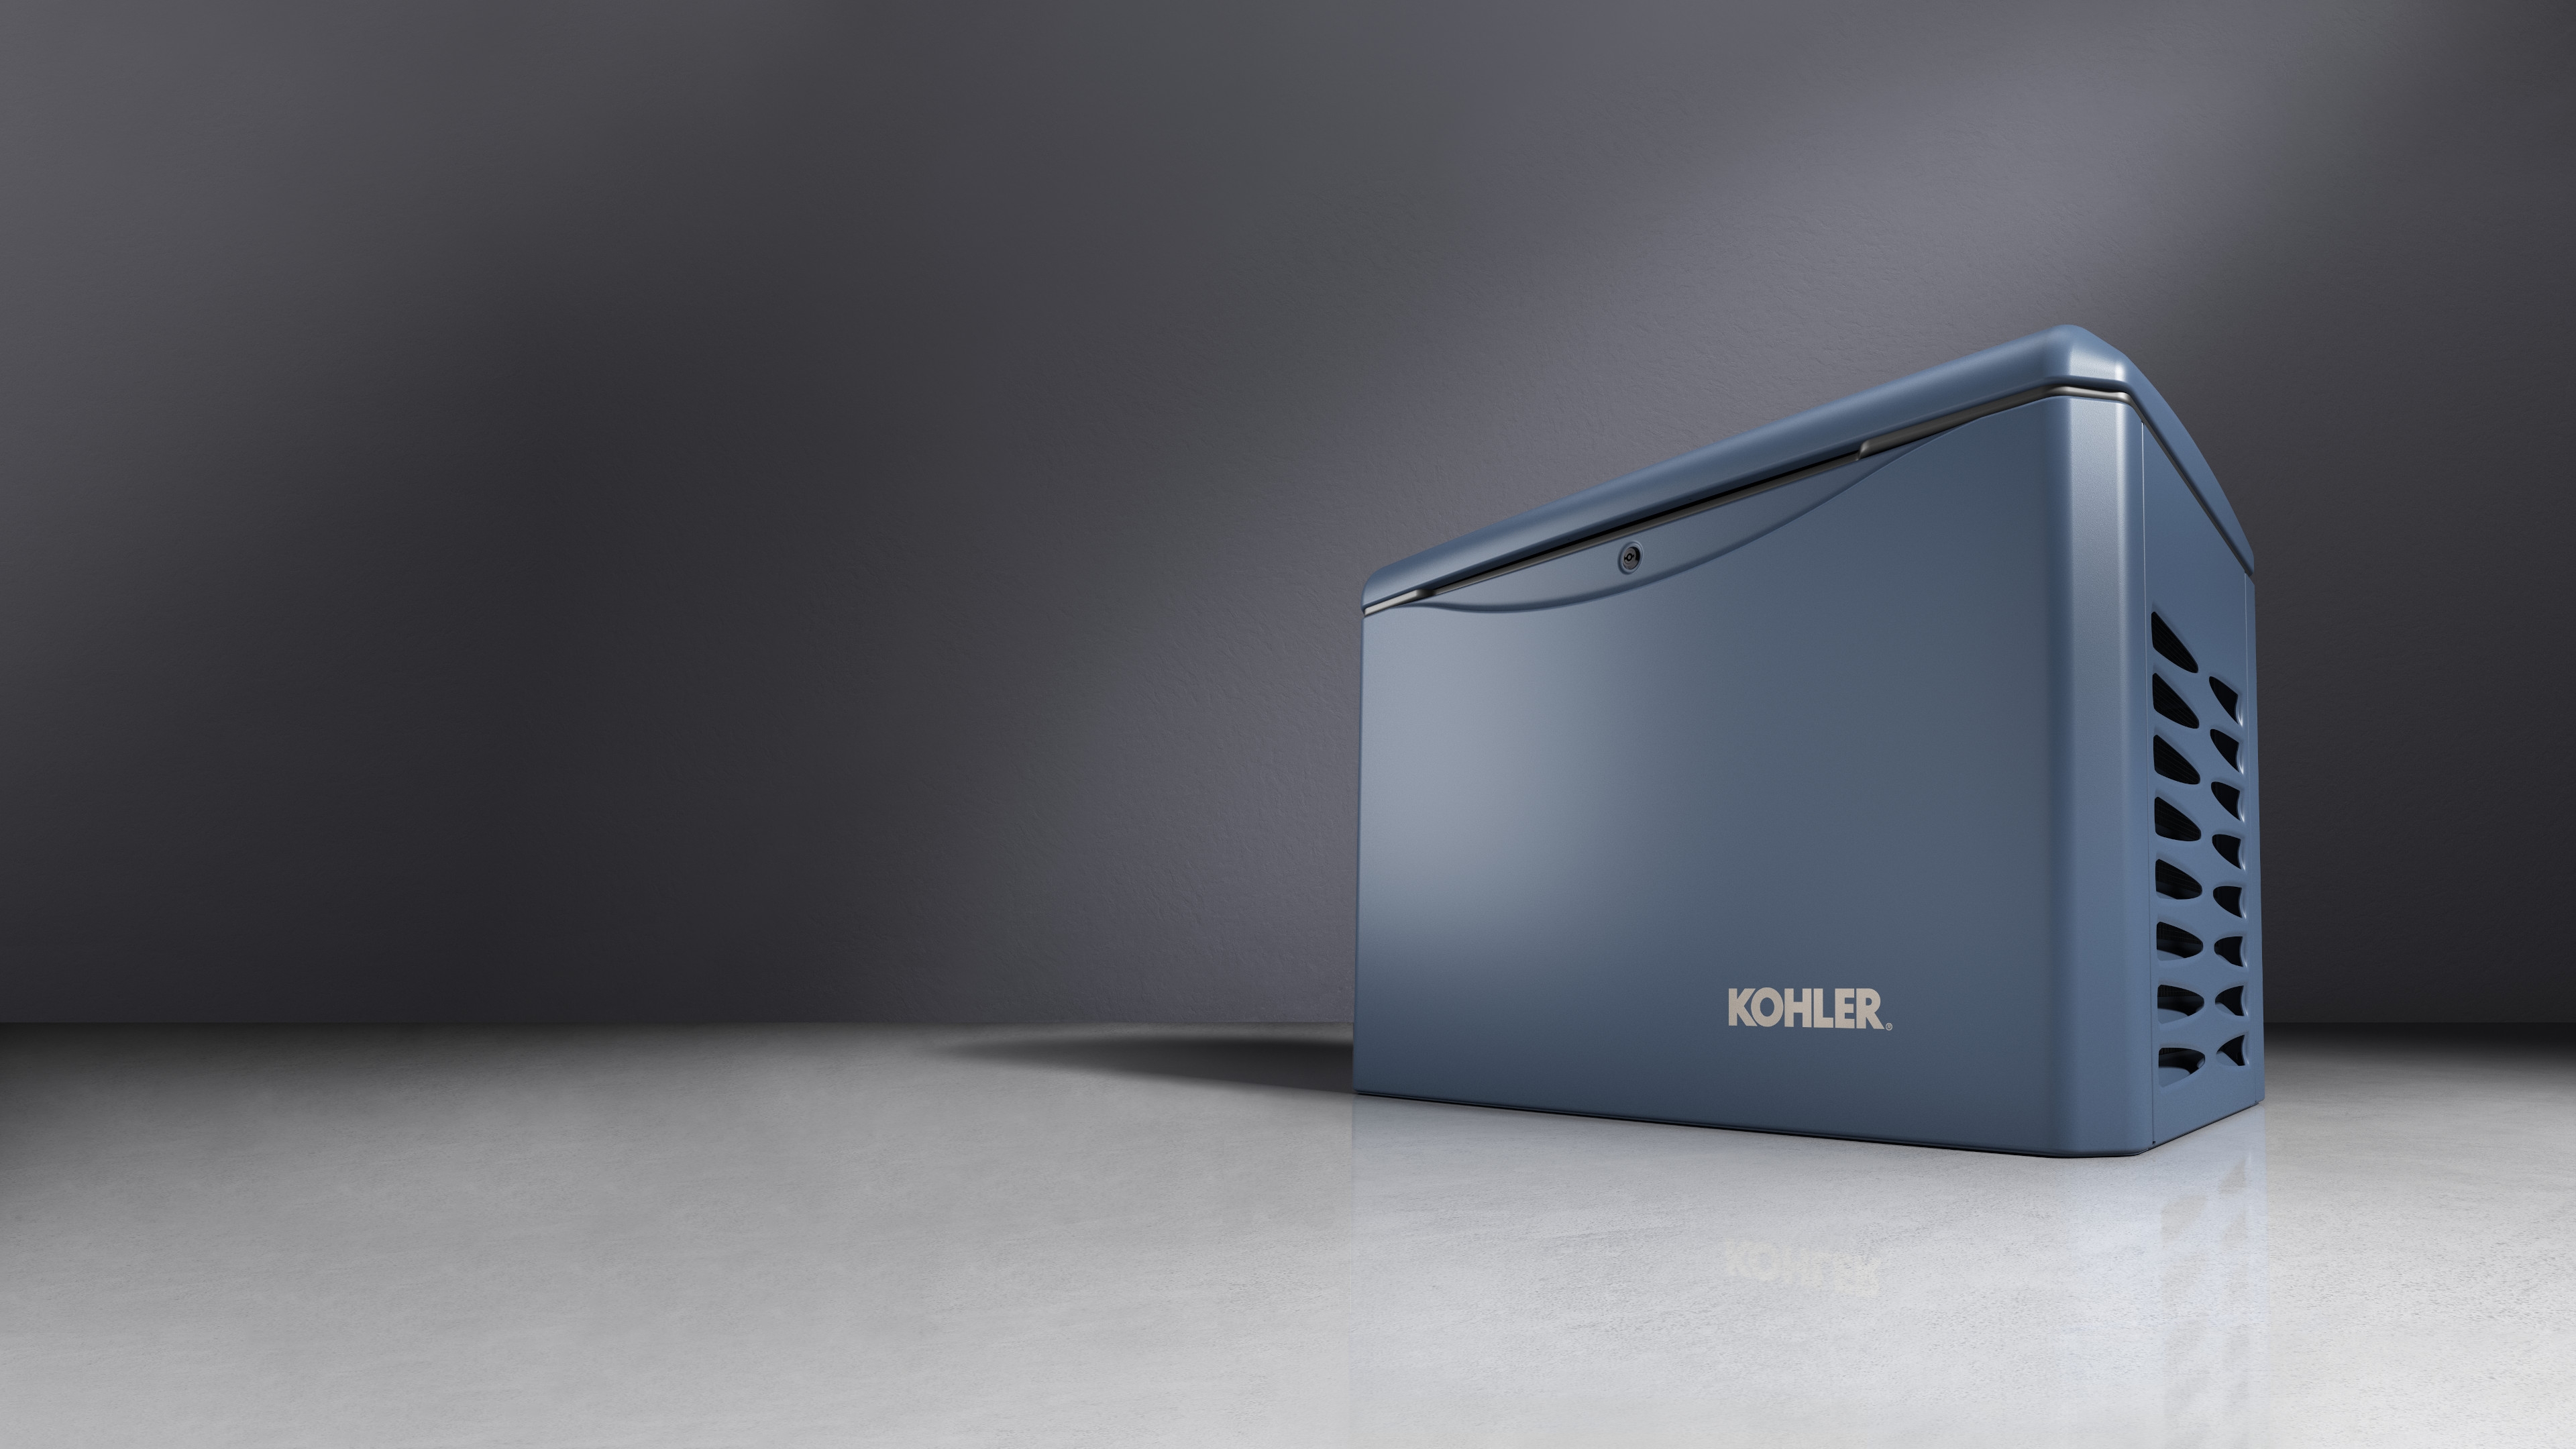 Admiralty color Kohler residential generator with ventilated side panels, showcased against a gradient gray background.